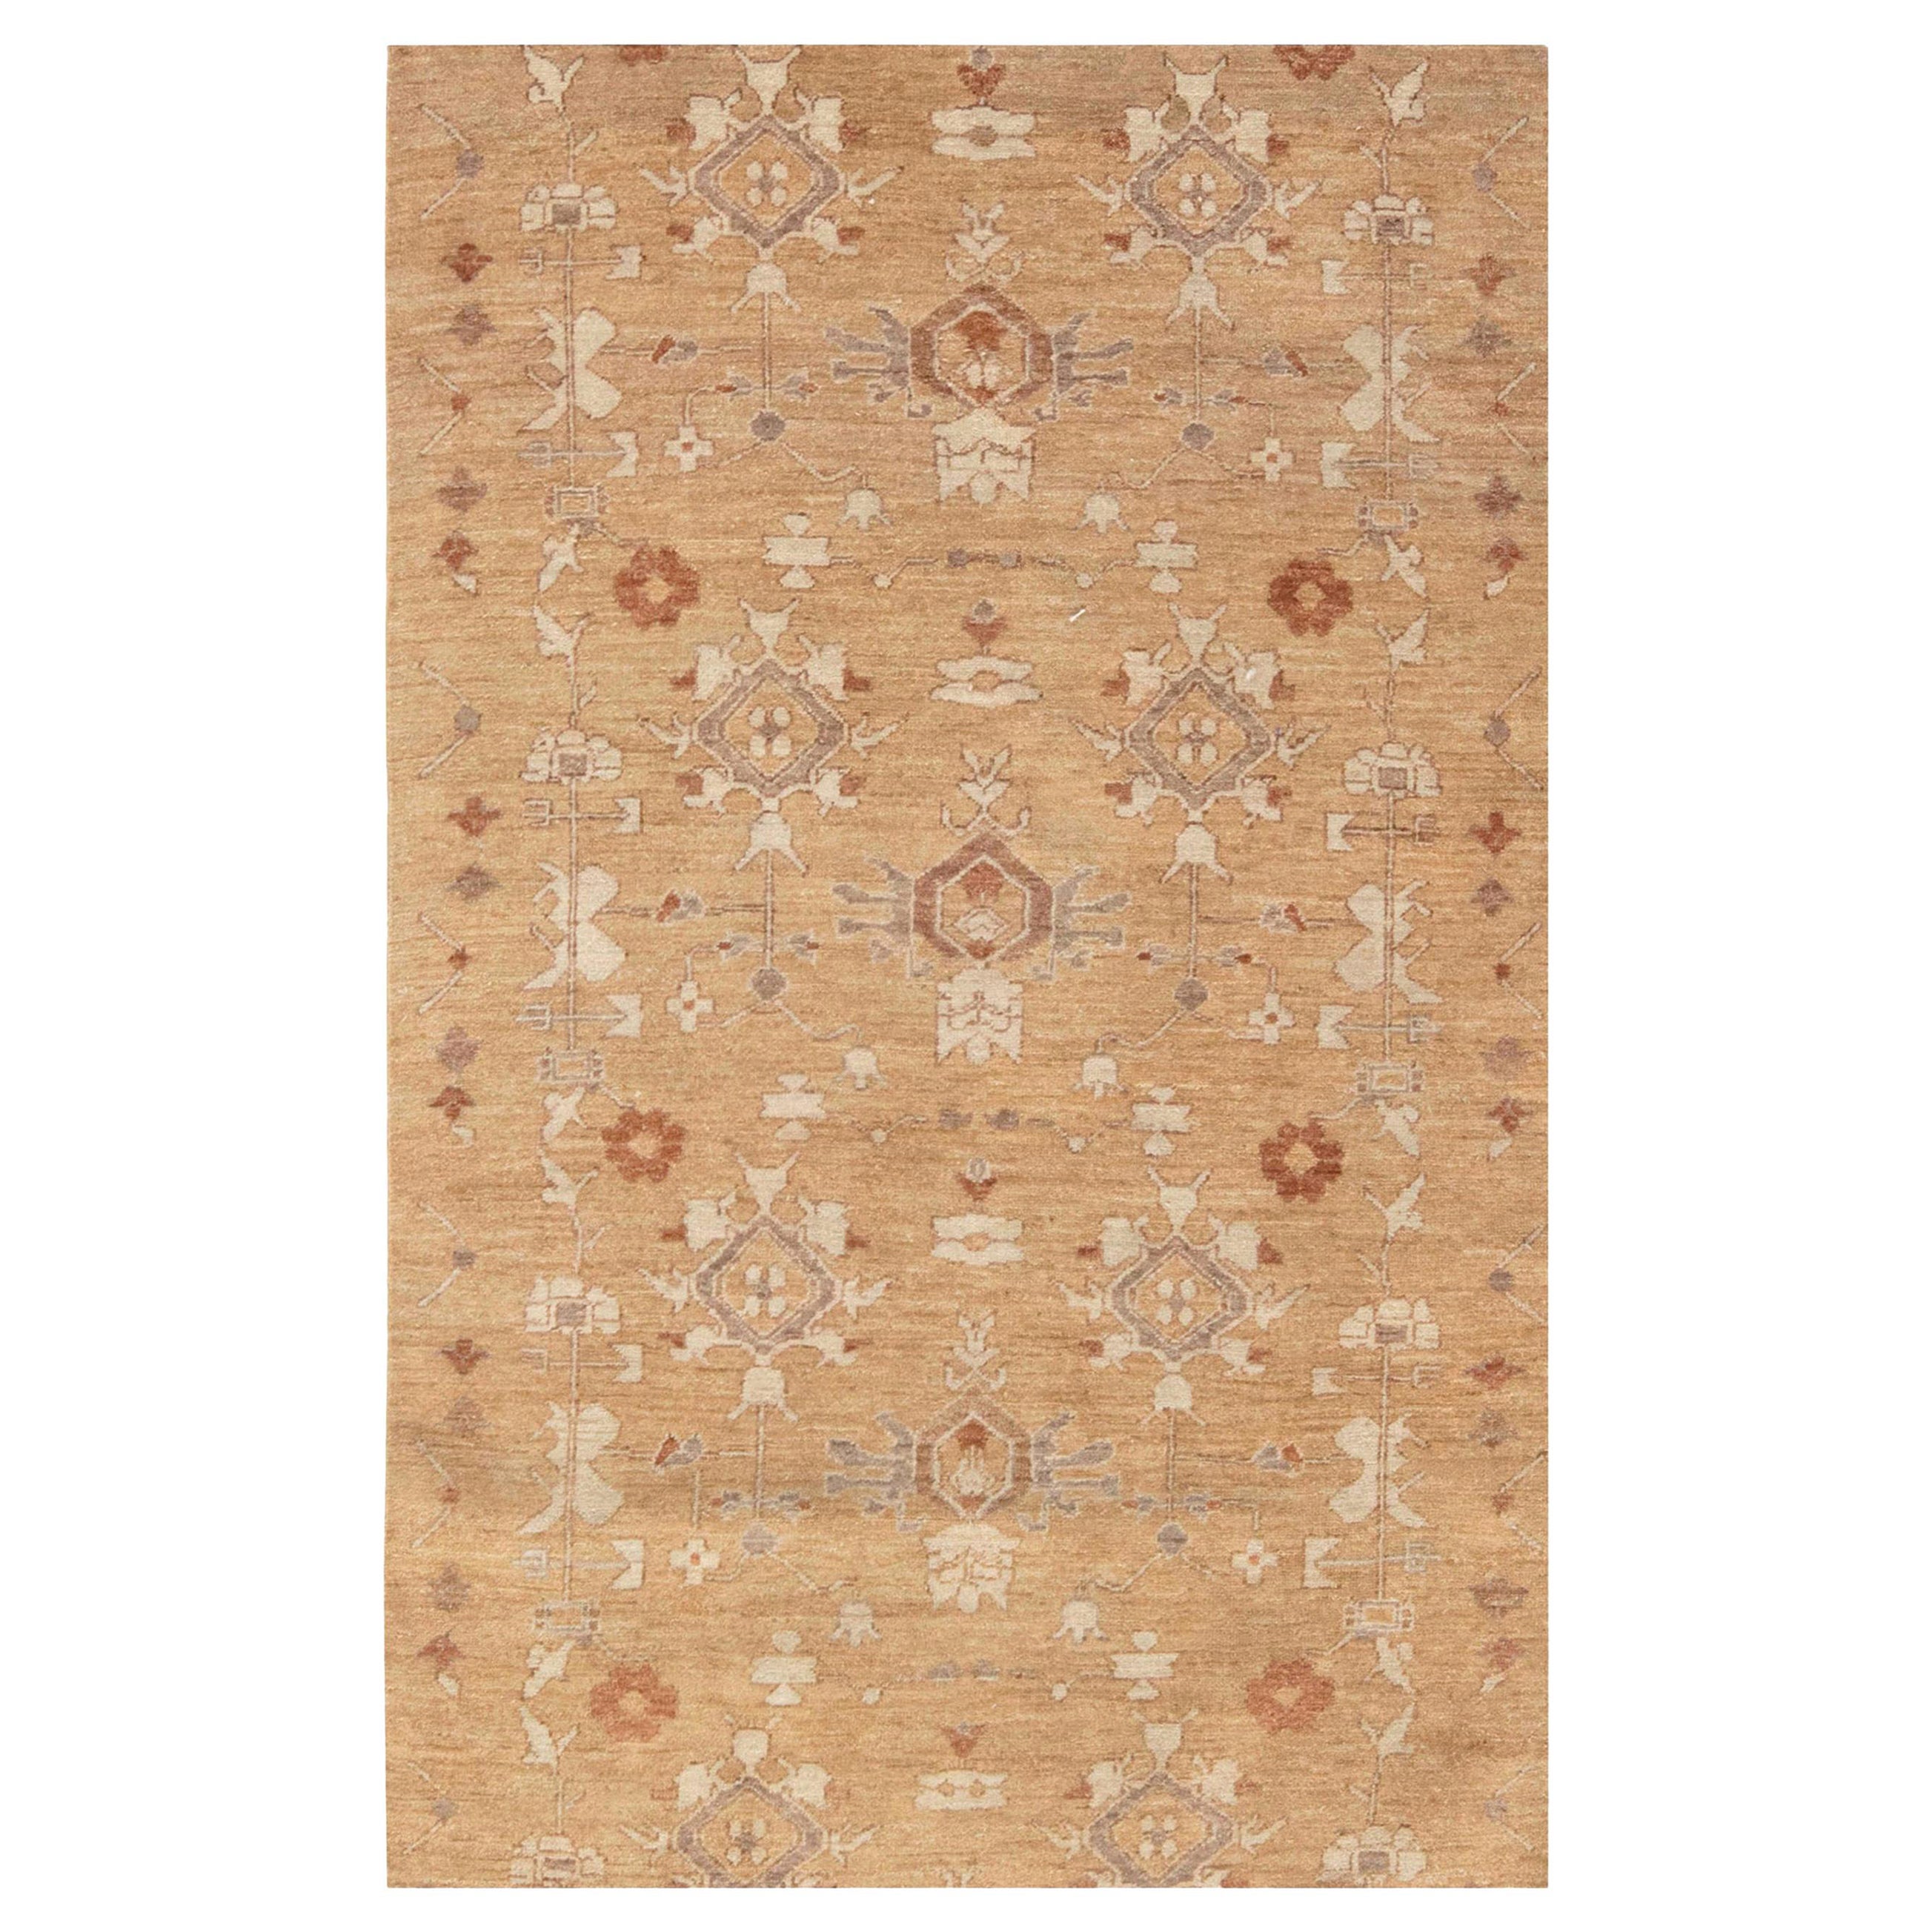 Traditional Inspired Tabriz Rug in Beige and Brown by Doris Leslie Blau For Sale